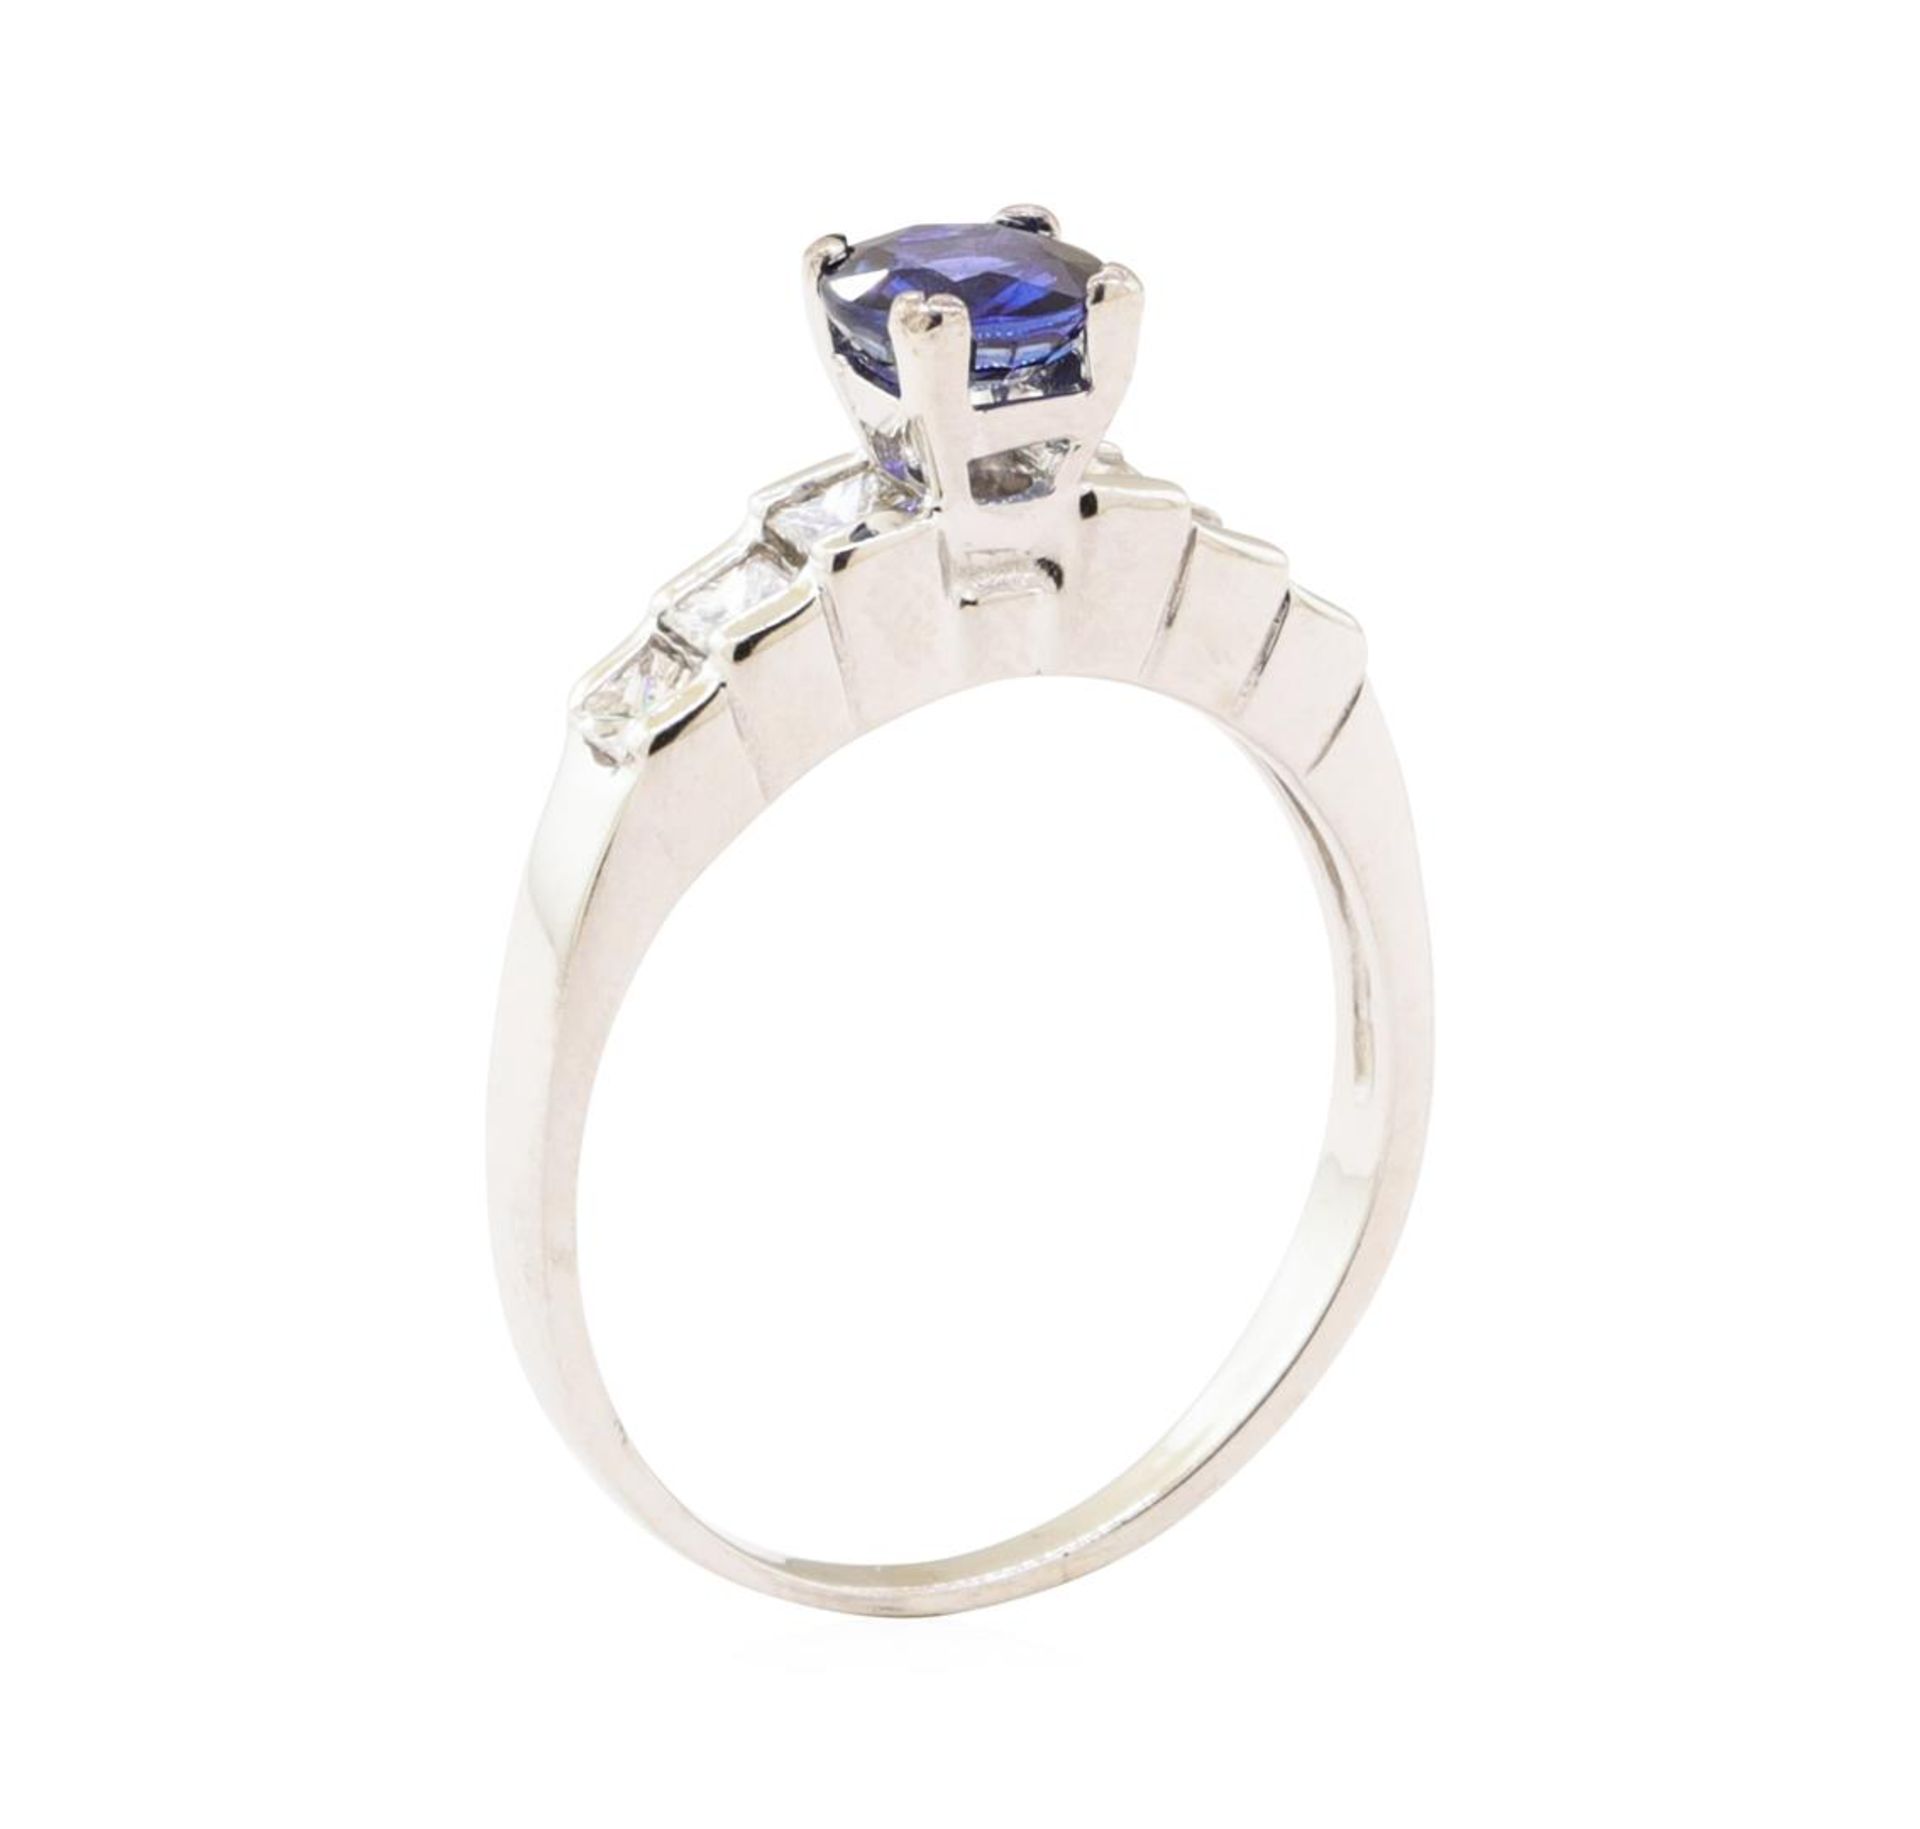 1.34 ctw Blue Sapphire and Diamond Ring - 14KT White Gold - Image 4 of 4